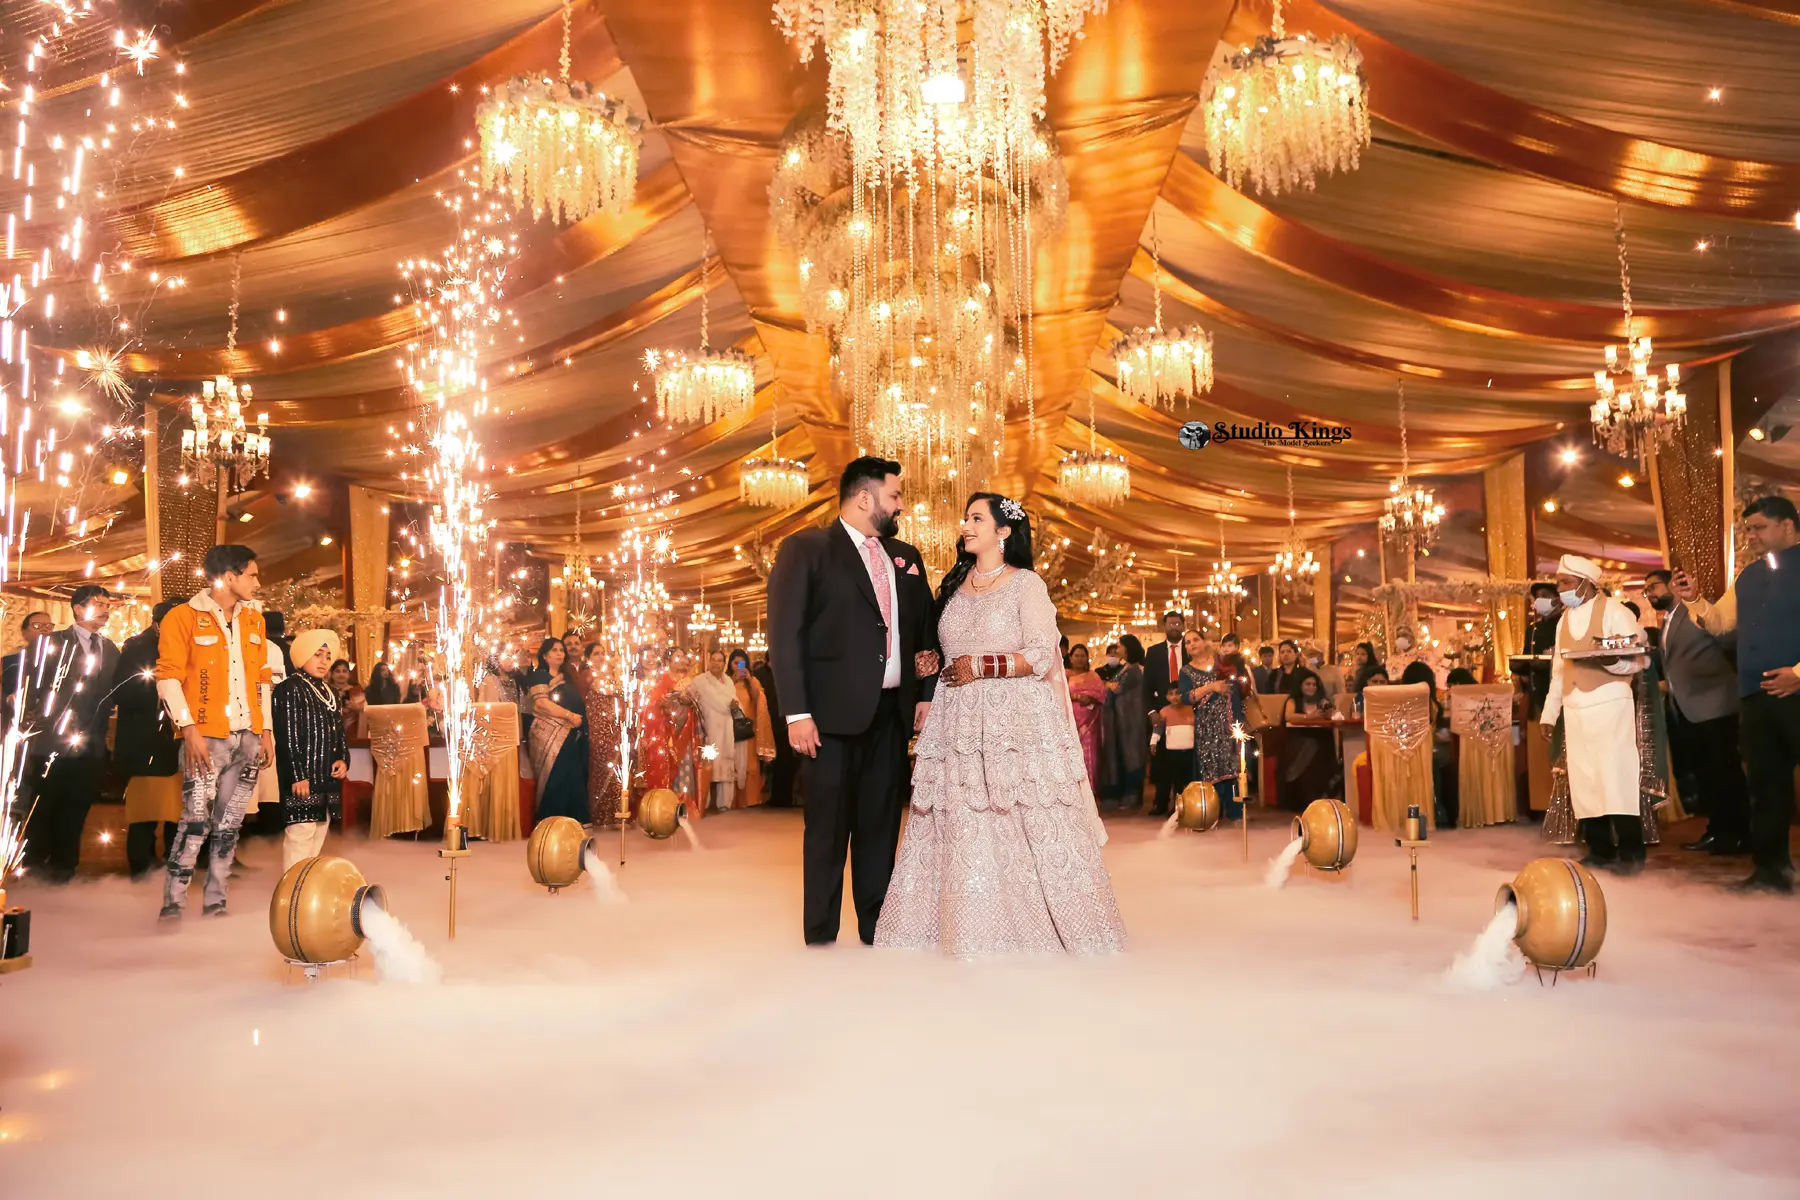 "Experience the grandeur and majesty of the couple's arrival at their wedding. Studio Kings Wedding Photography captures the regal aura and anticipation that mark this extraordinary moment.